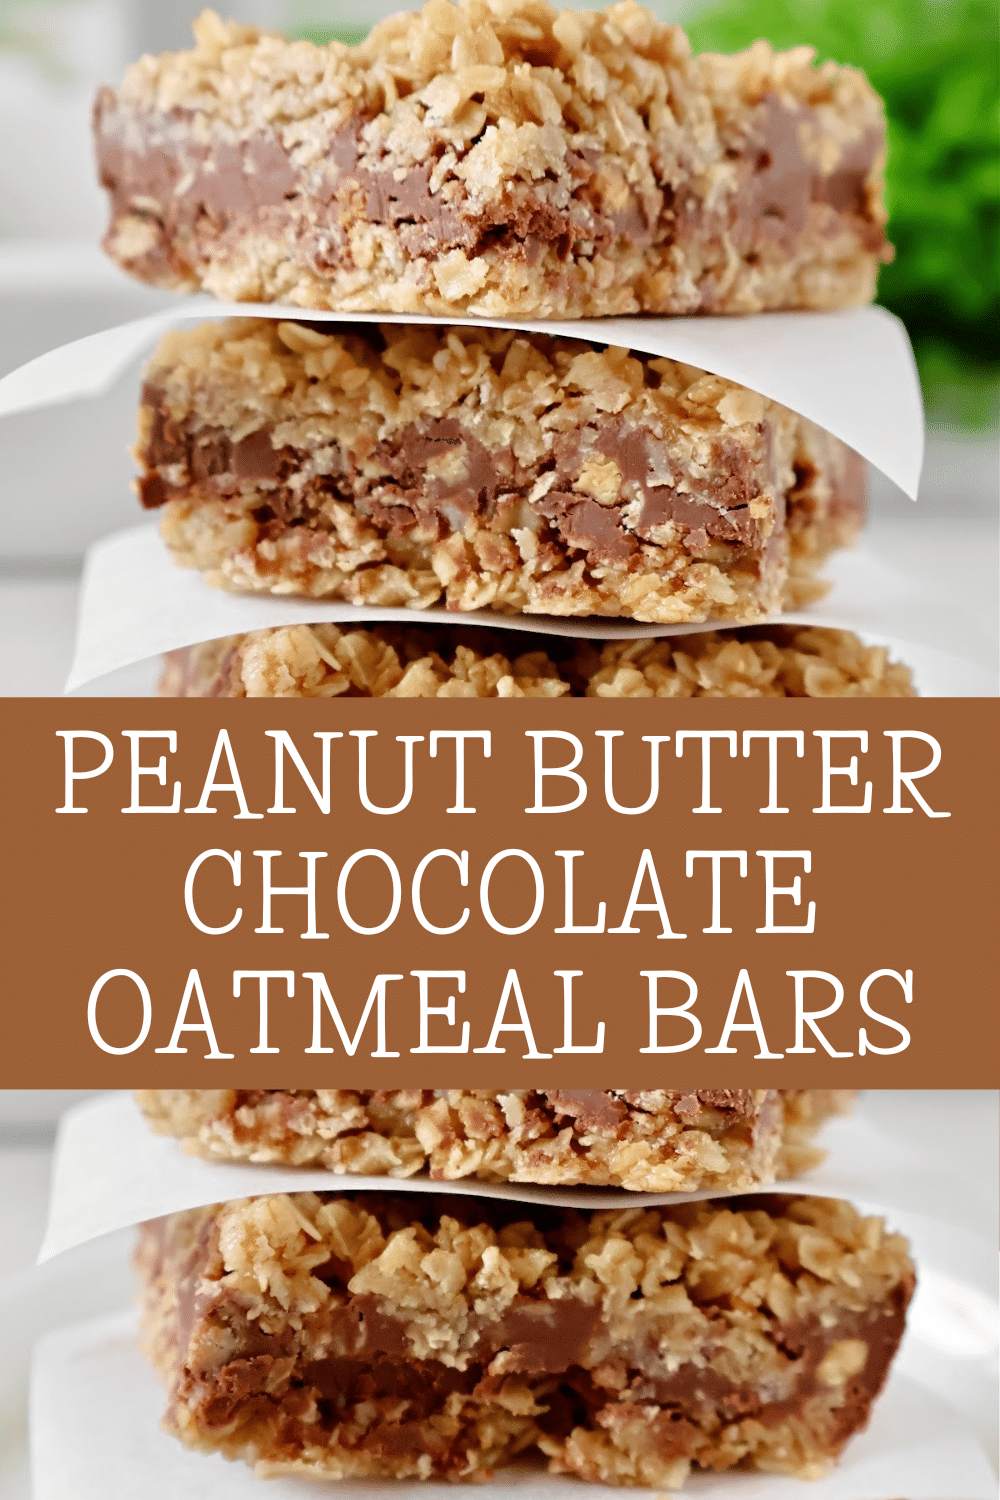 Peanut Butter Chocolate Oatmeal Bars ~ Sweet treat that's super easy to make with a buttery oatmeal base, layer of rich chocolate and peanut butter, and a crumbly oatmeal topping. via @thiswifecooks